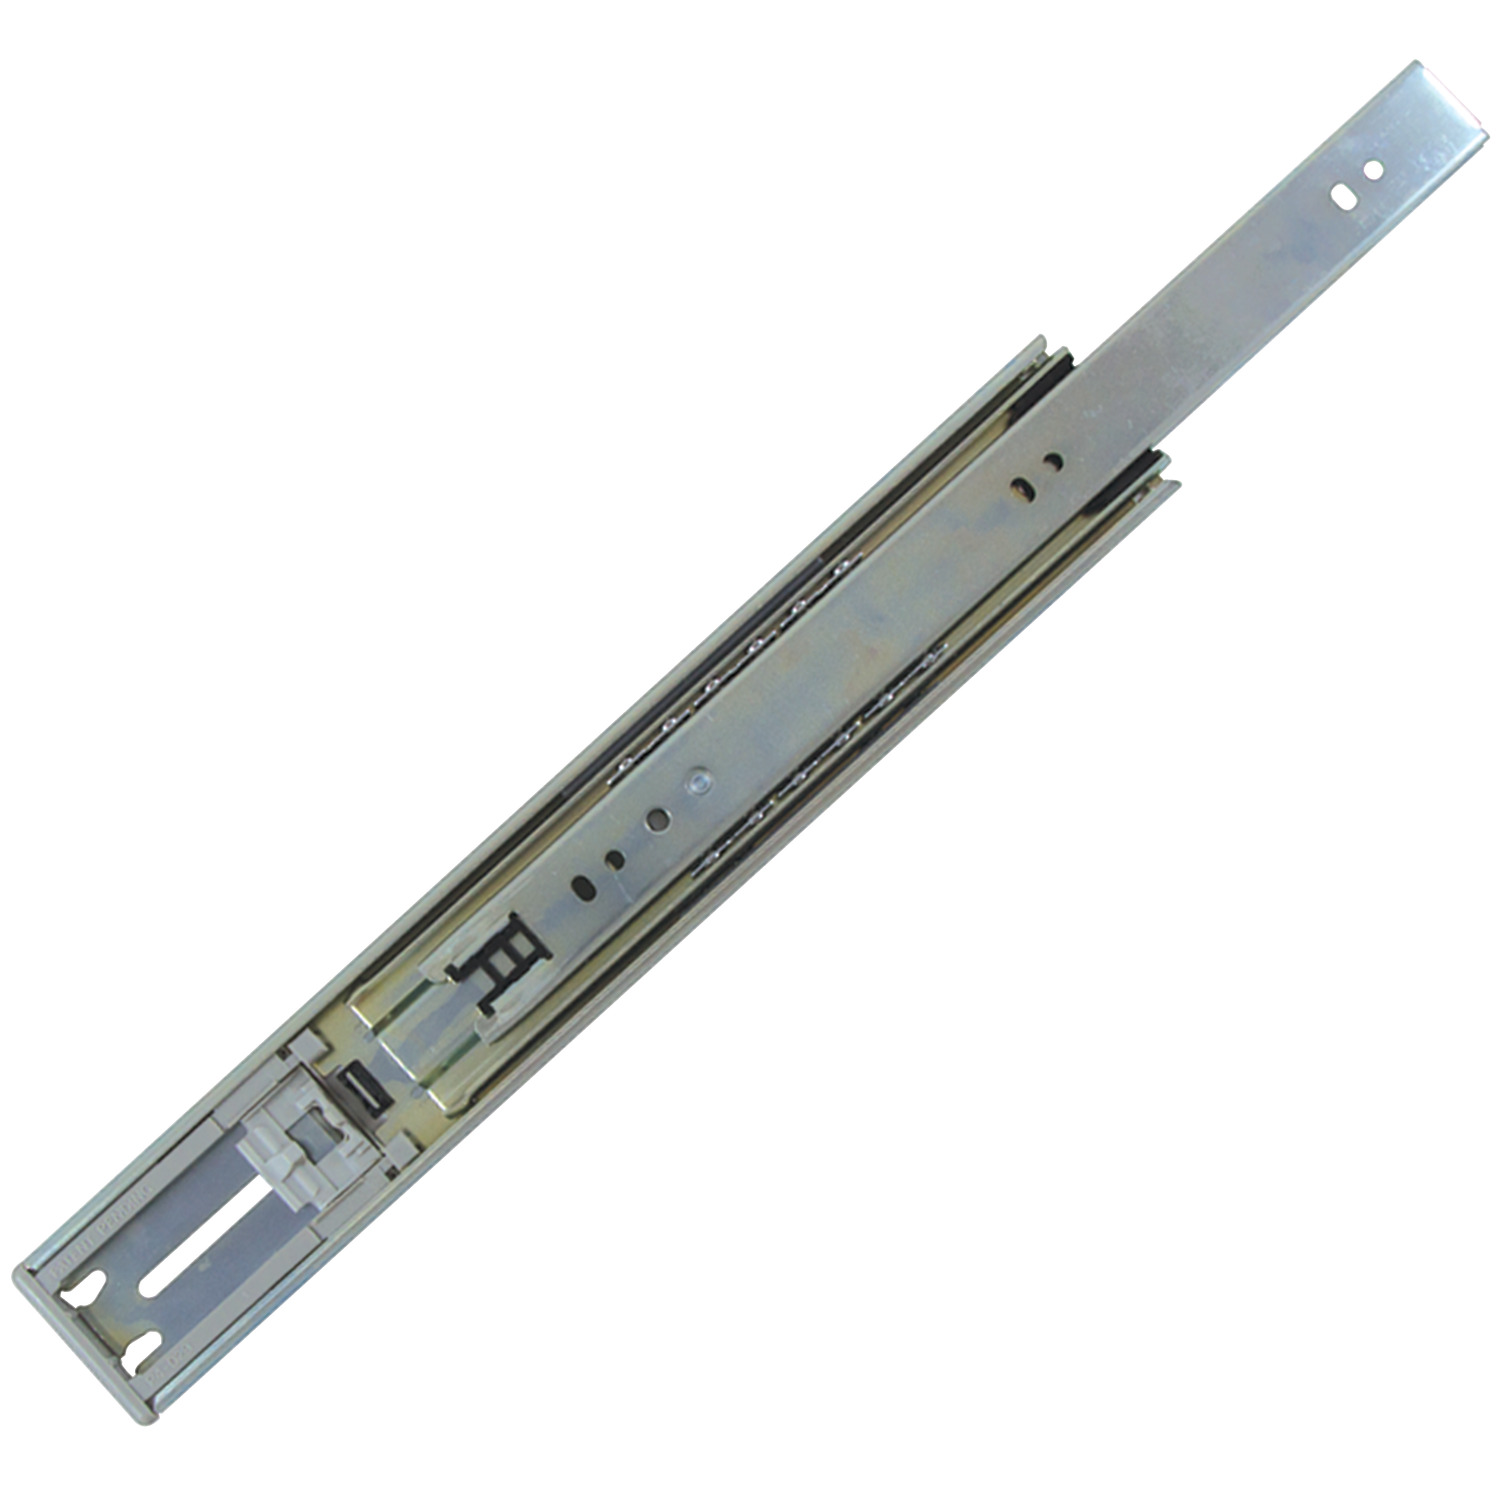 P4100.AC0700 Drawer Slide Full Extn Length 700; Load 45kg per pair. Sold Individually. Lever Disconnect; Soft Close